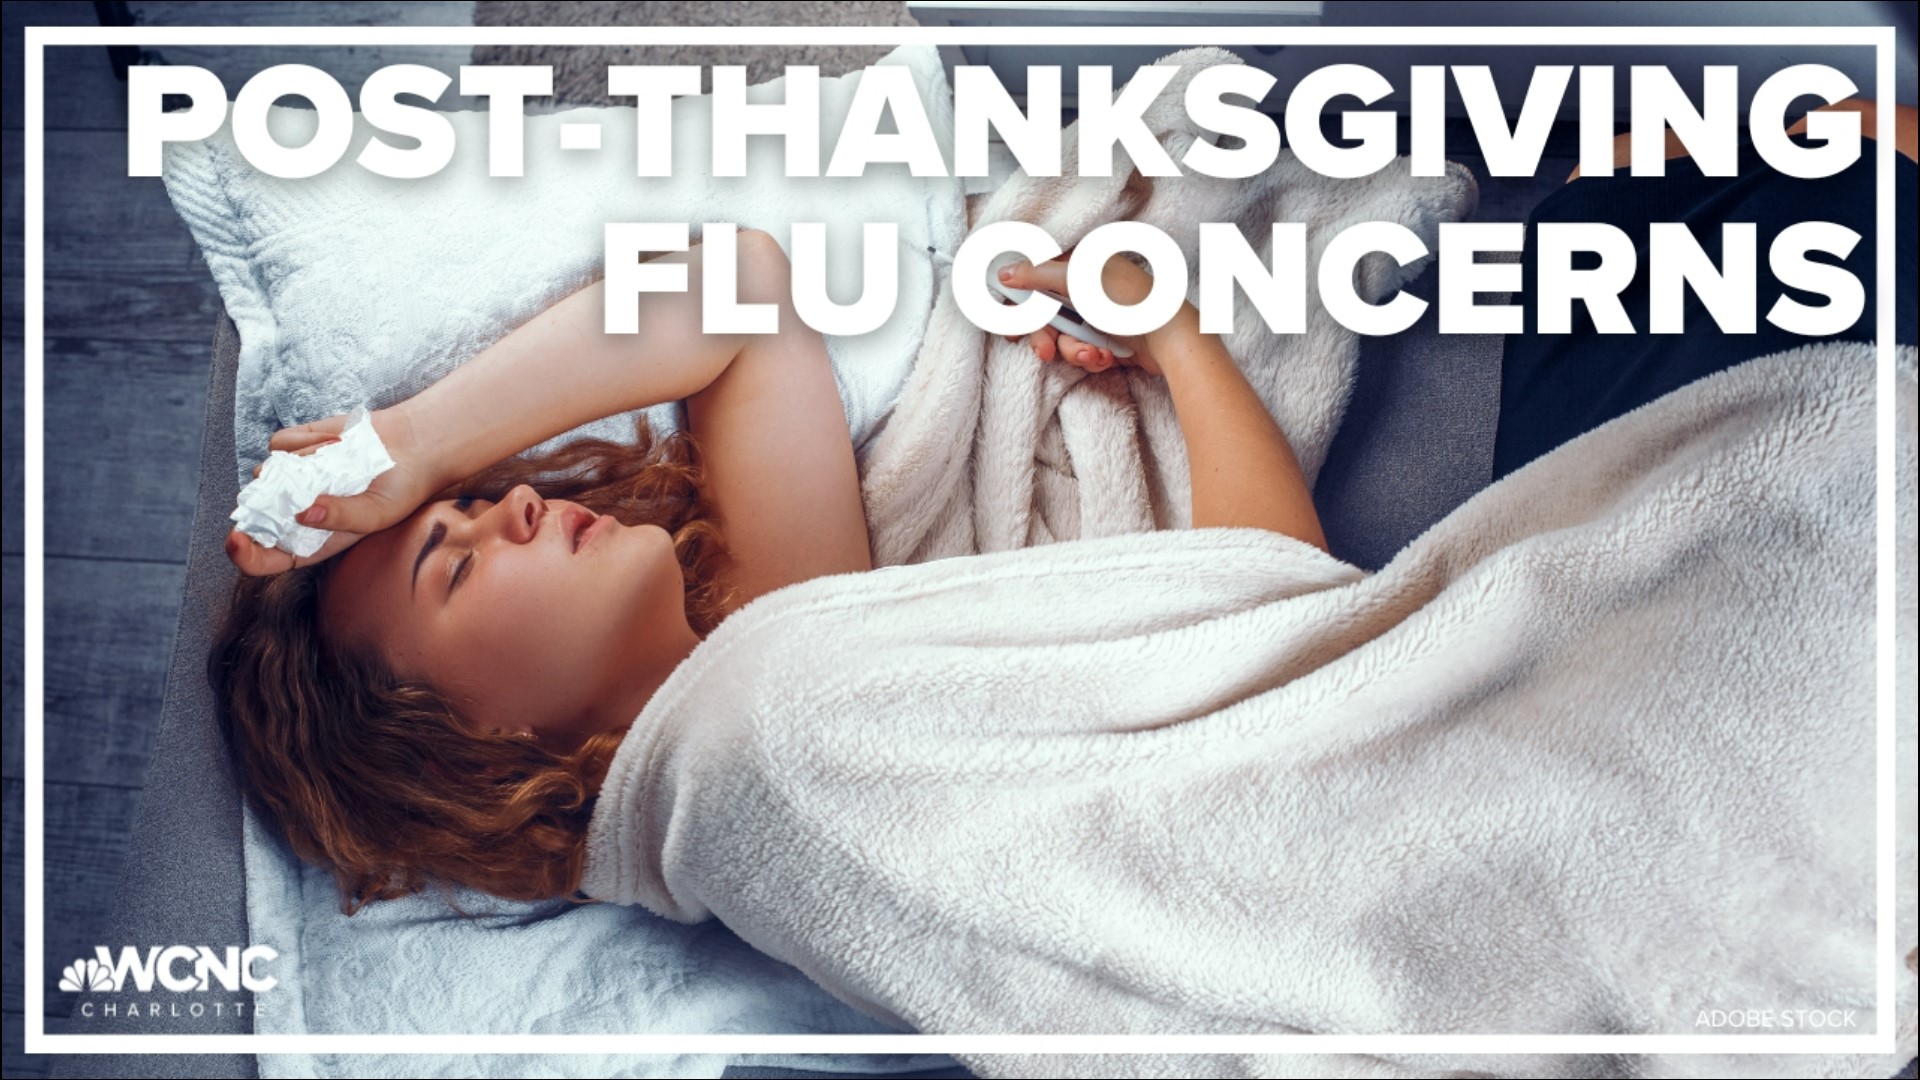 Health officials are bracing for what could be another post Thanksgiving surge of flu and COVID cases.